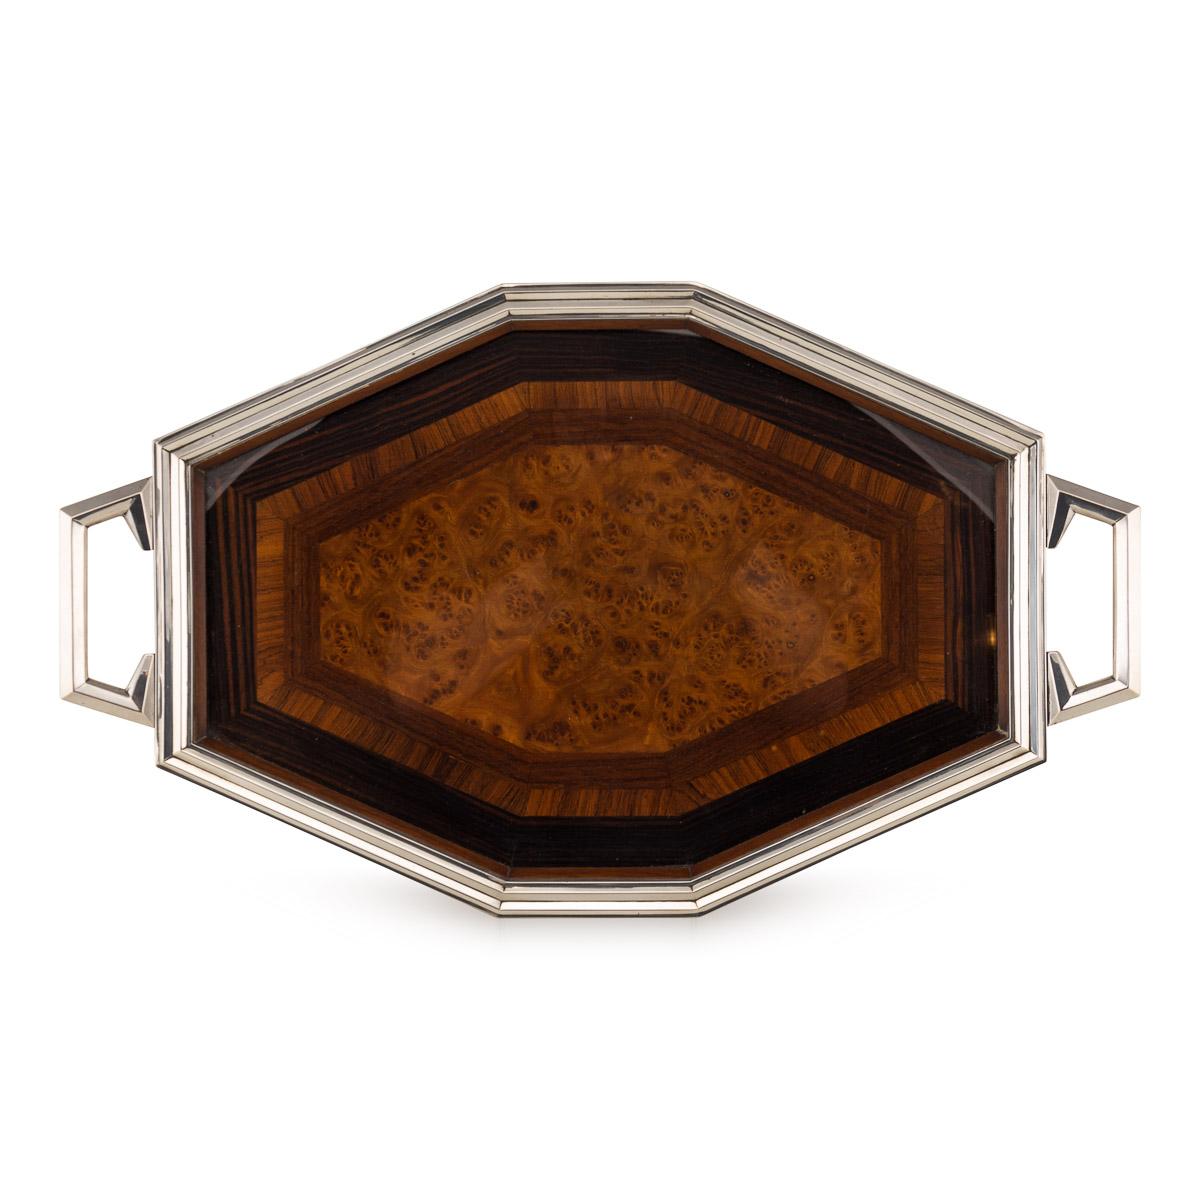 A stylish wooden tray with a continental silver frame and handles. This French tray is decorated with tulip wood burr walnut and ebony marquetry under glass. This would be perfect for any modern or mid century interior whether for home use or office